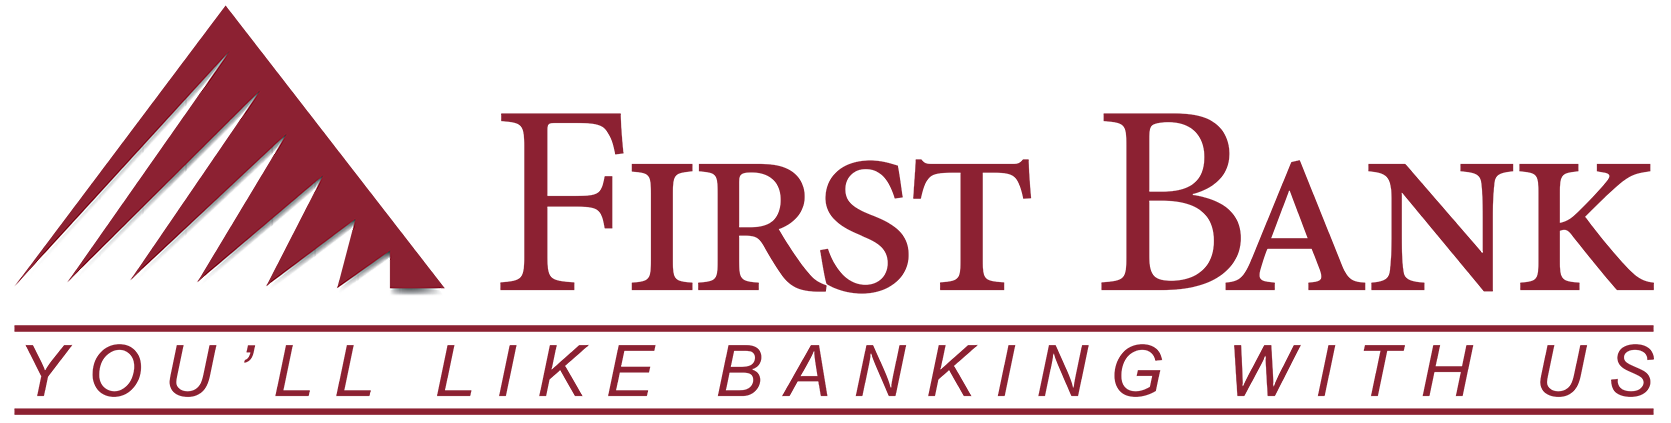 firstbanklogo.png